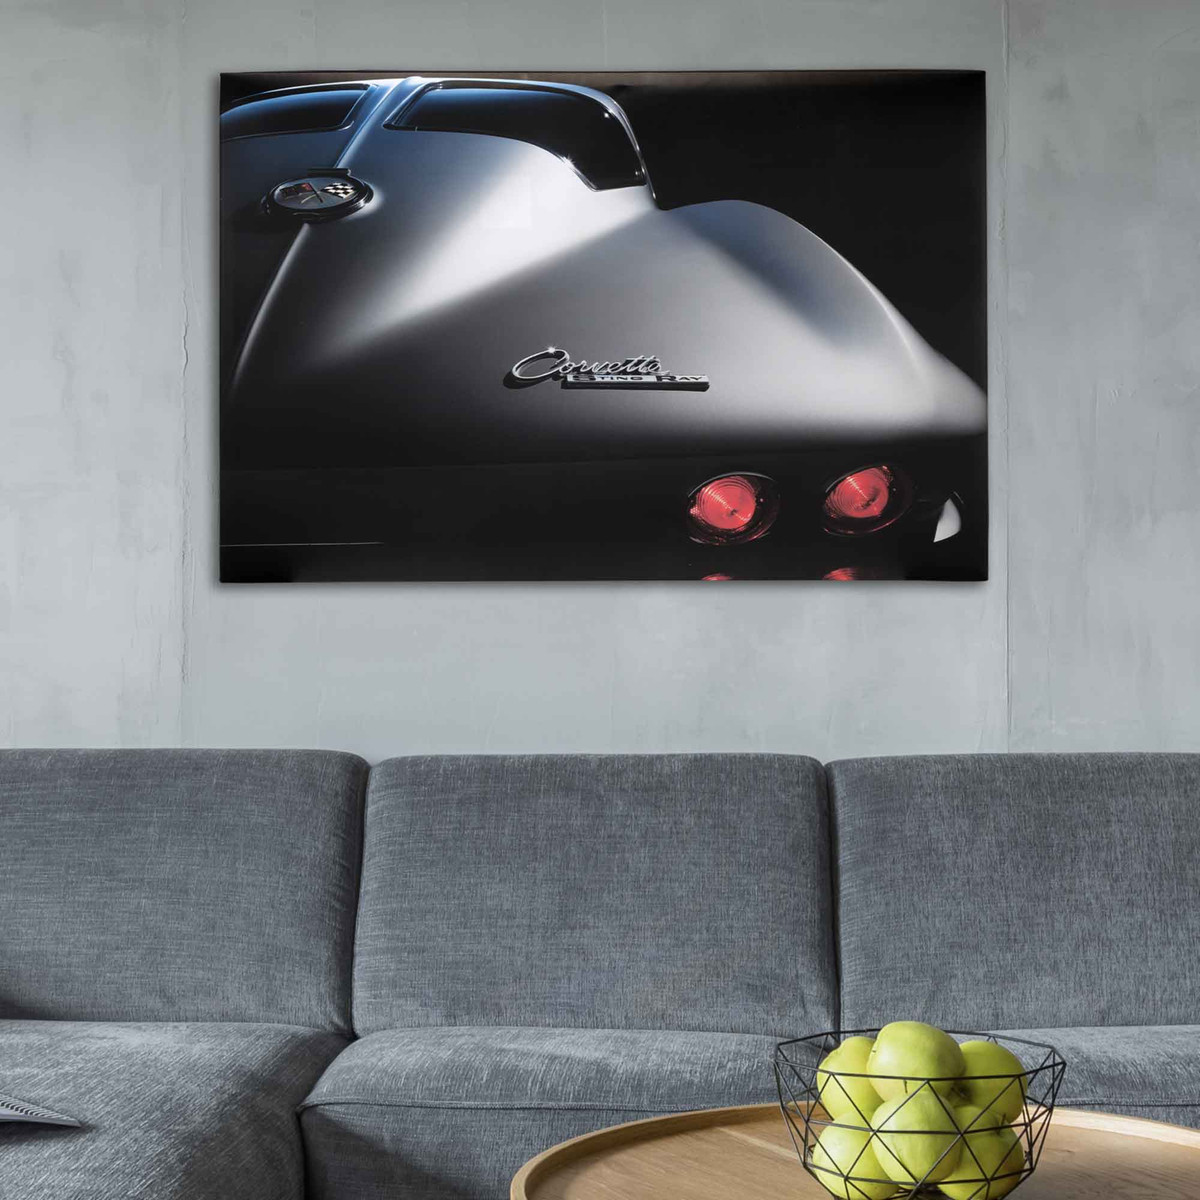 These sleek curves are enough to get anyone's blood pumping! Grace your walls with this General Motors Silver Chevrolet Corvette, the close-up detail is second to none!  

popclassics.com/general-motors…

#CanvasWallArt #WrappedCanvas #Walldecor #homedecor #mypopclassics #mypopstyle